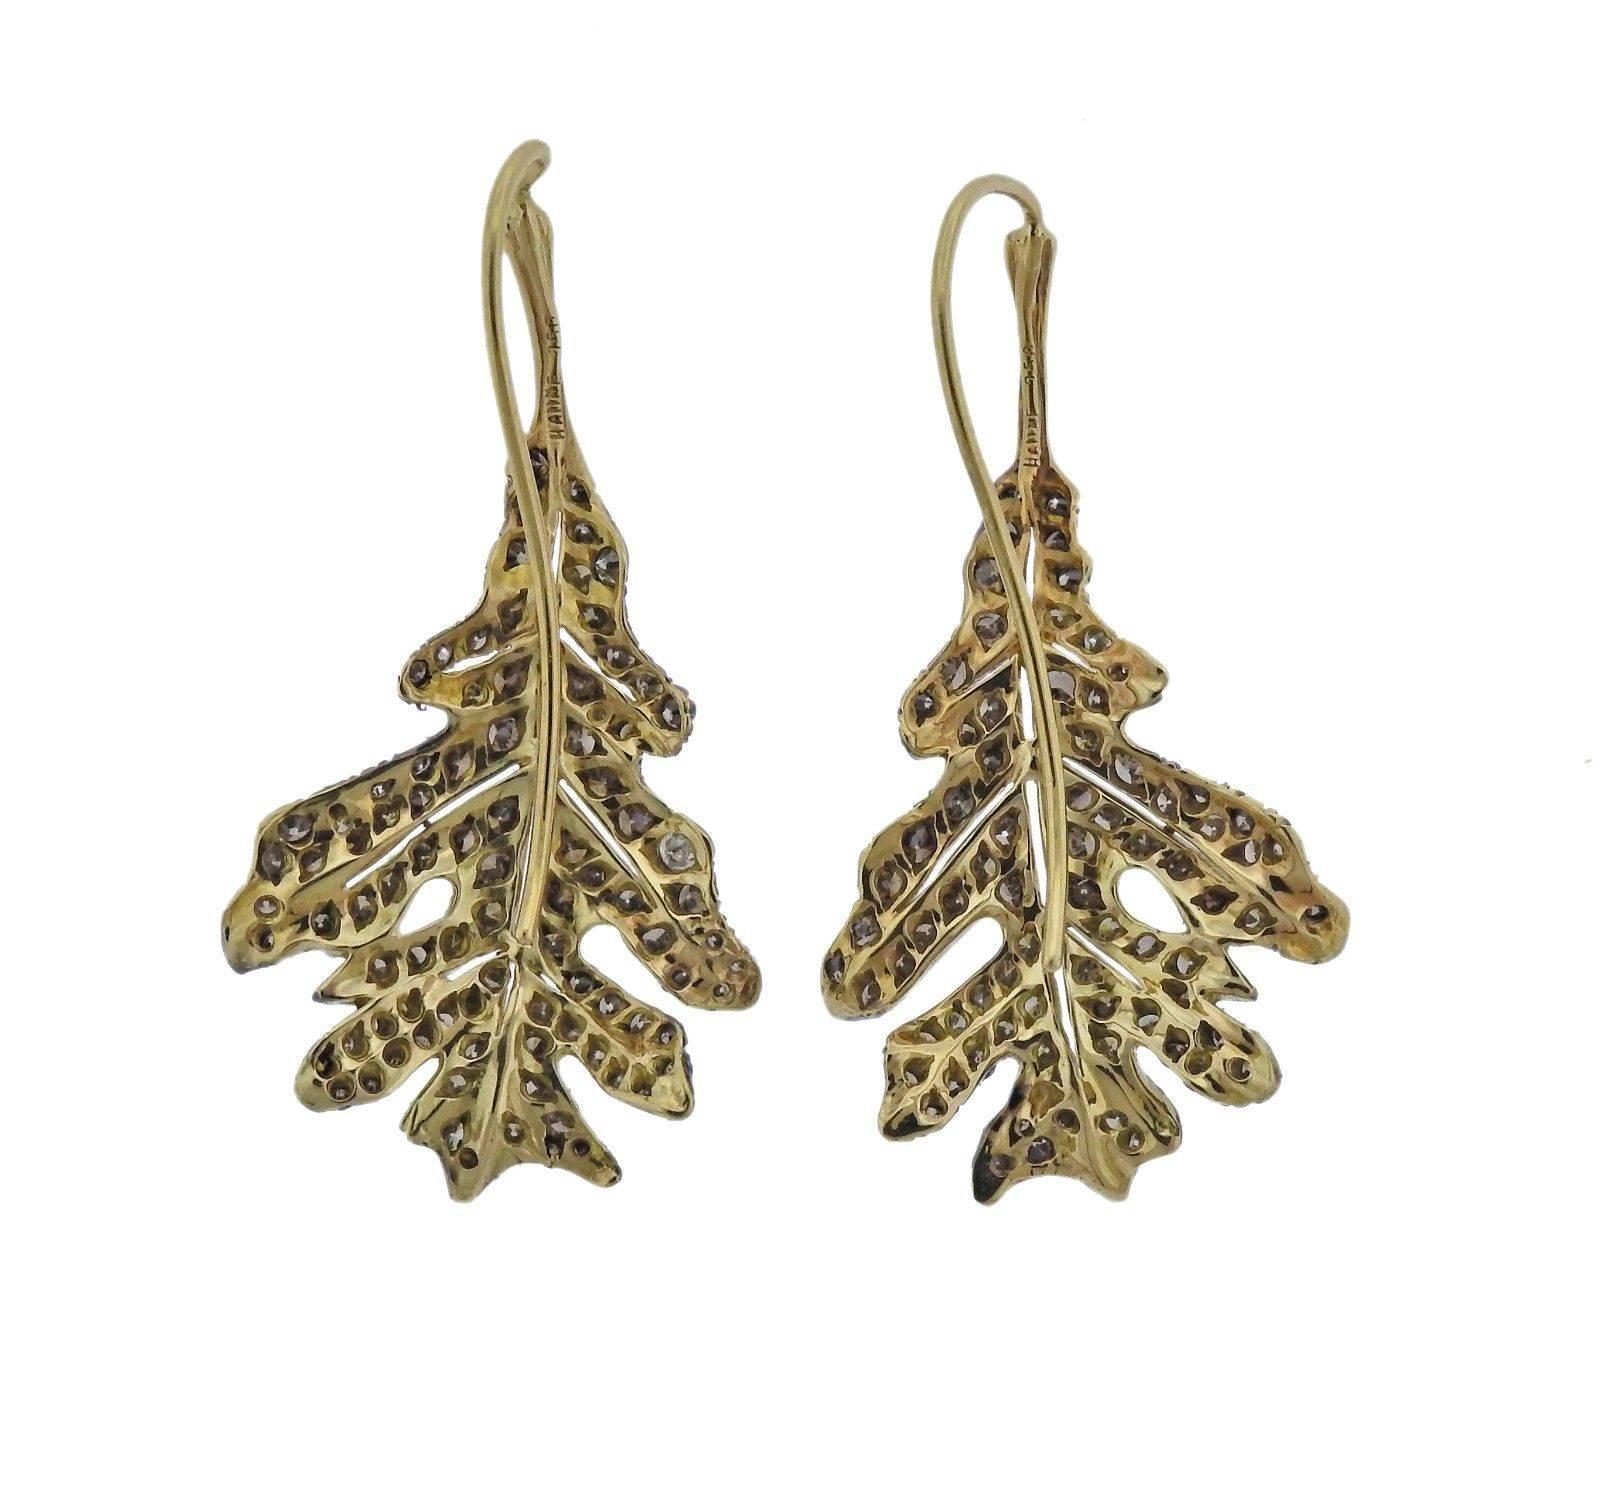 A pair of 18k gold earrings depicting leaves, set with approximately 2 carats of fancy diamonds.  Crafted by Adria de Haume, the earrings measure 43mm x 22mm and weigh 9.8 grams.  Marked: Haume, 750.